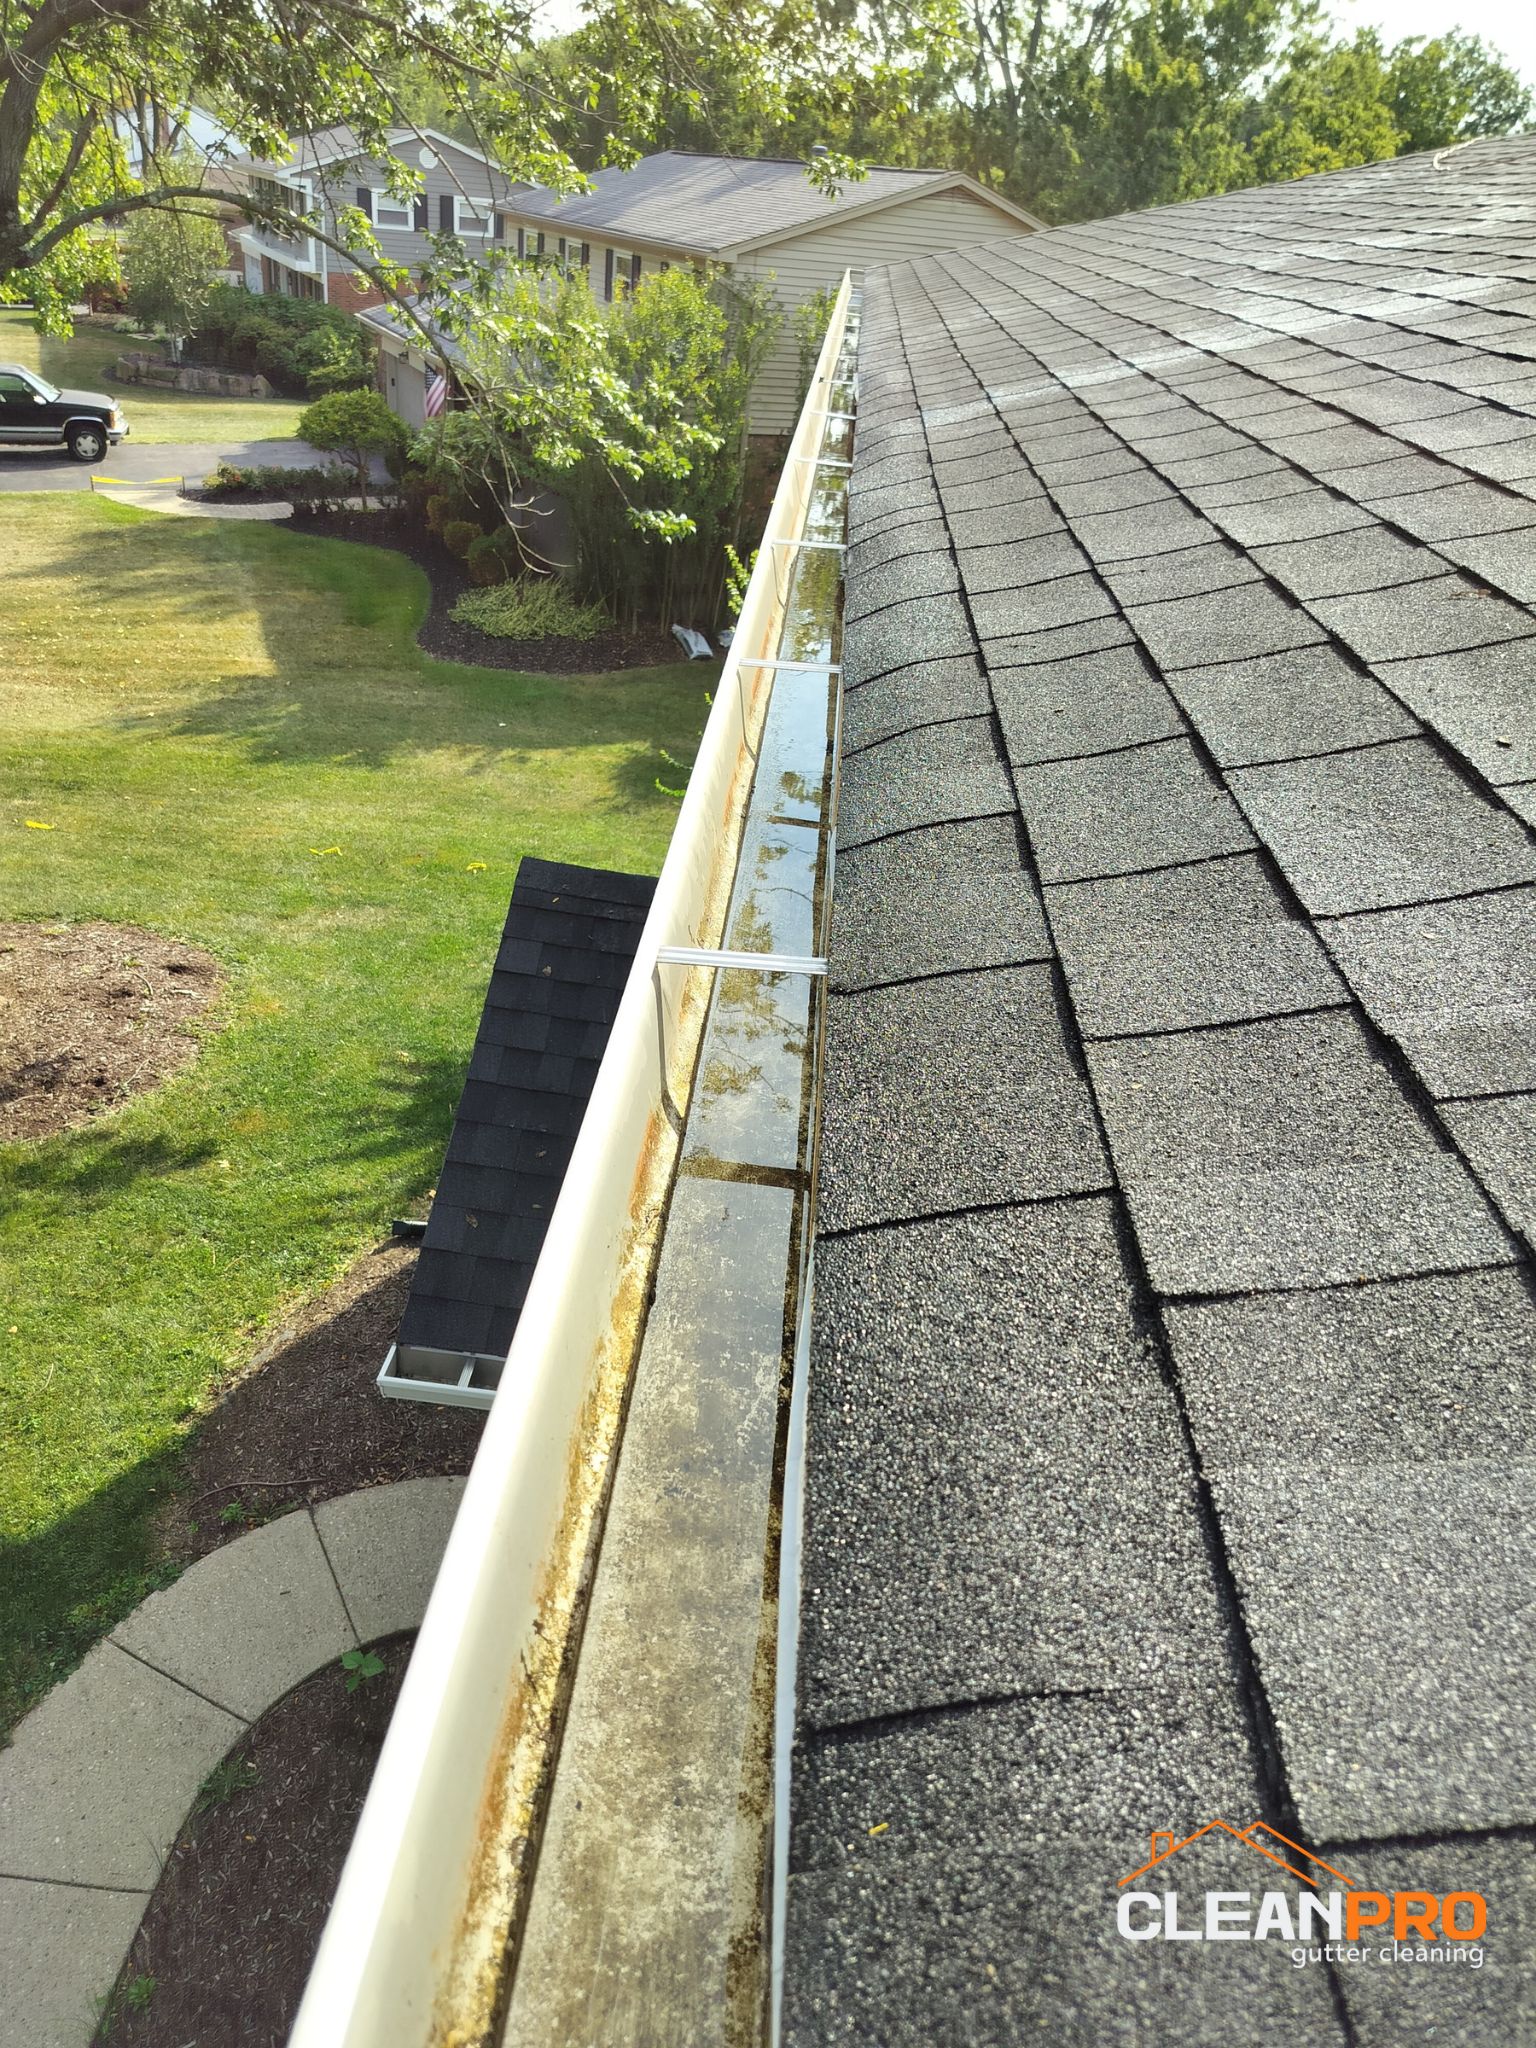 Gutter Cleaning in Naperville for Cindy Home